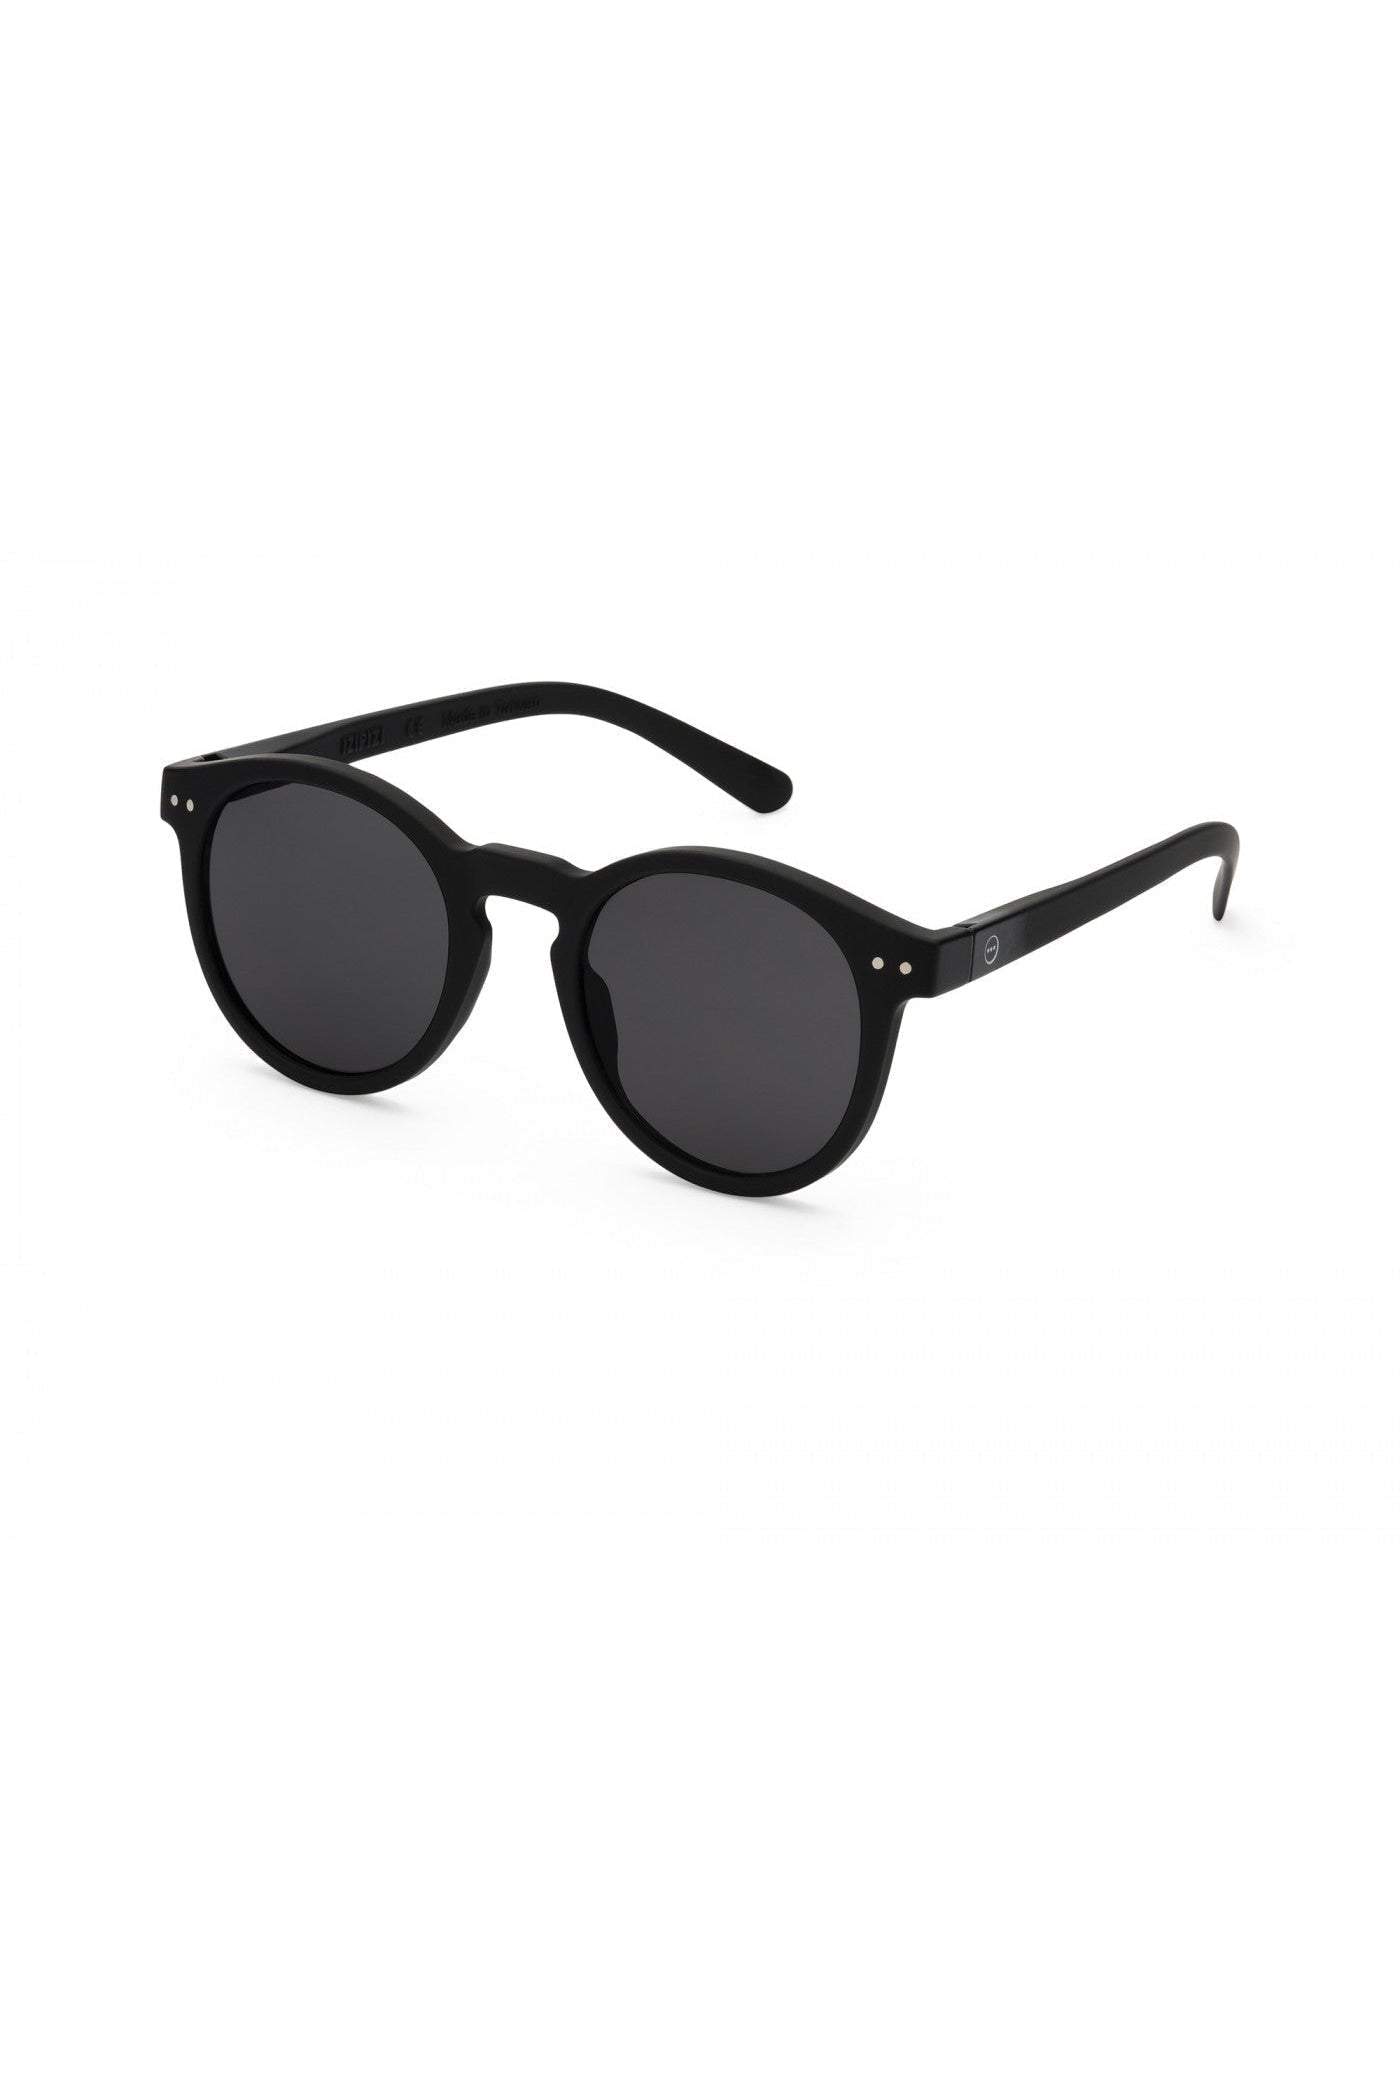 Izipizi #M Sunglasses in Black-Accessories-Ohh! By Gum - Shop Sustainable